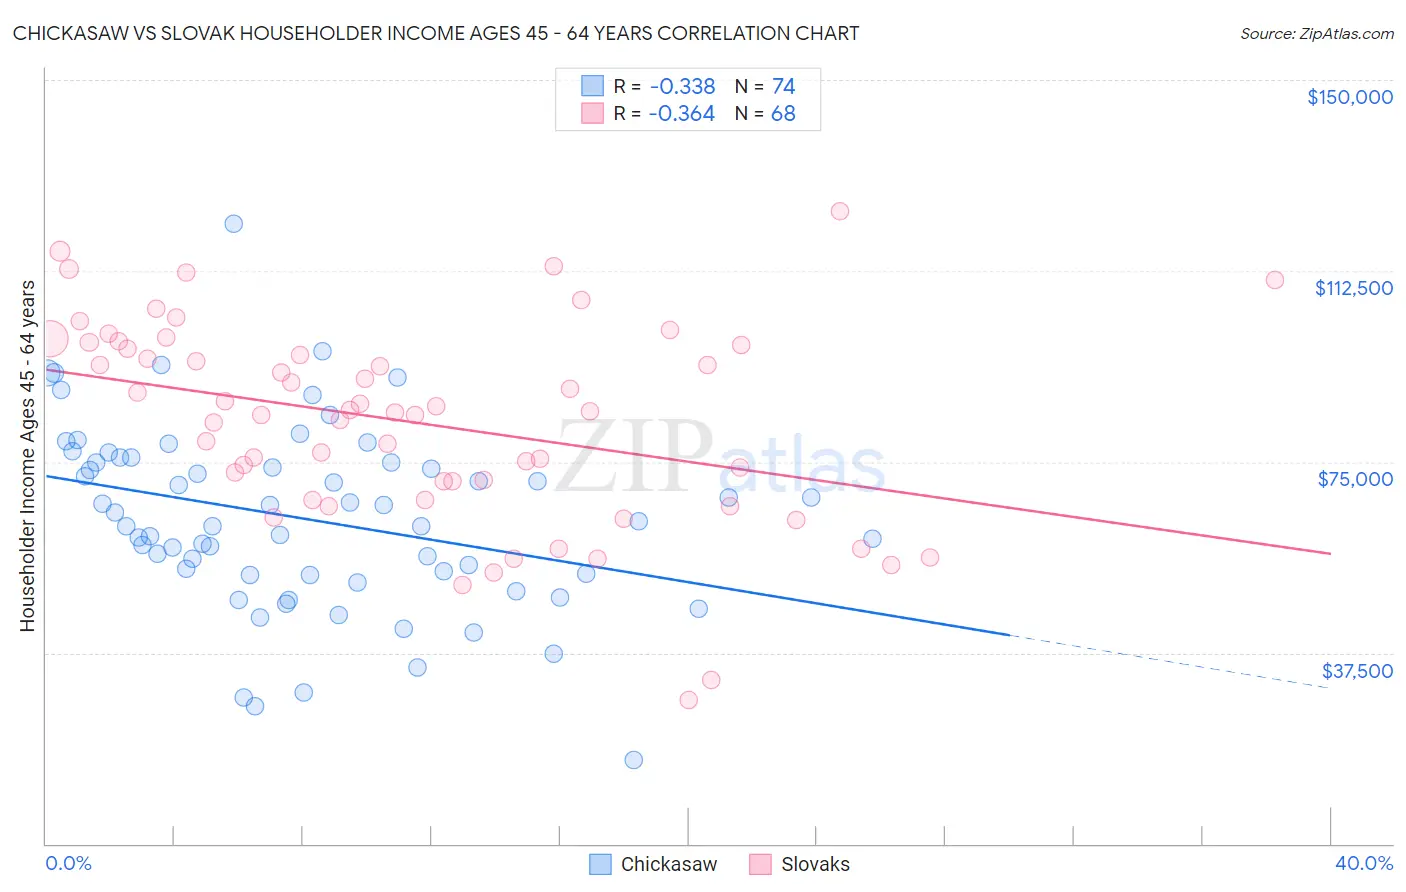 Chickasaw vs Slovak Householder Income Ages 45 - 64 years